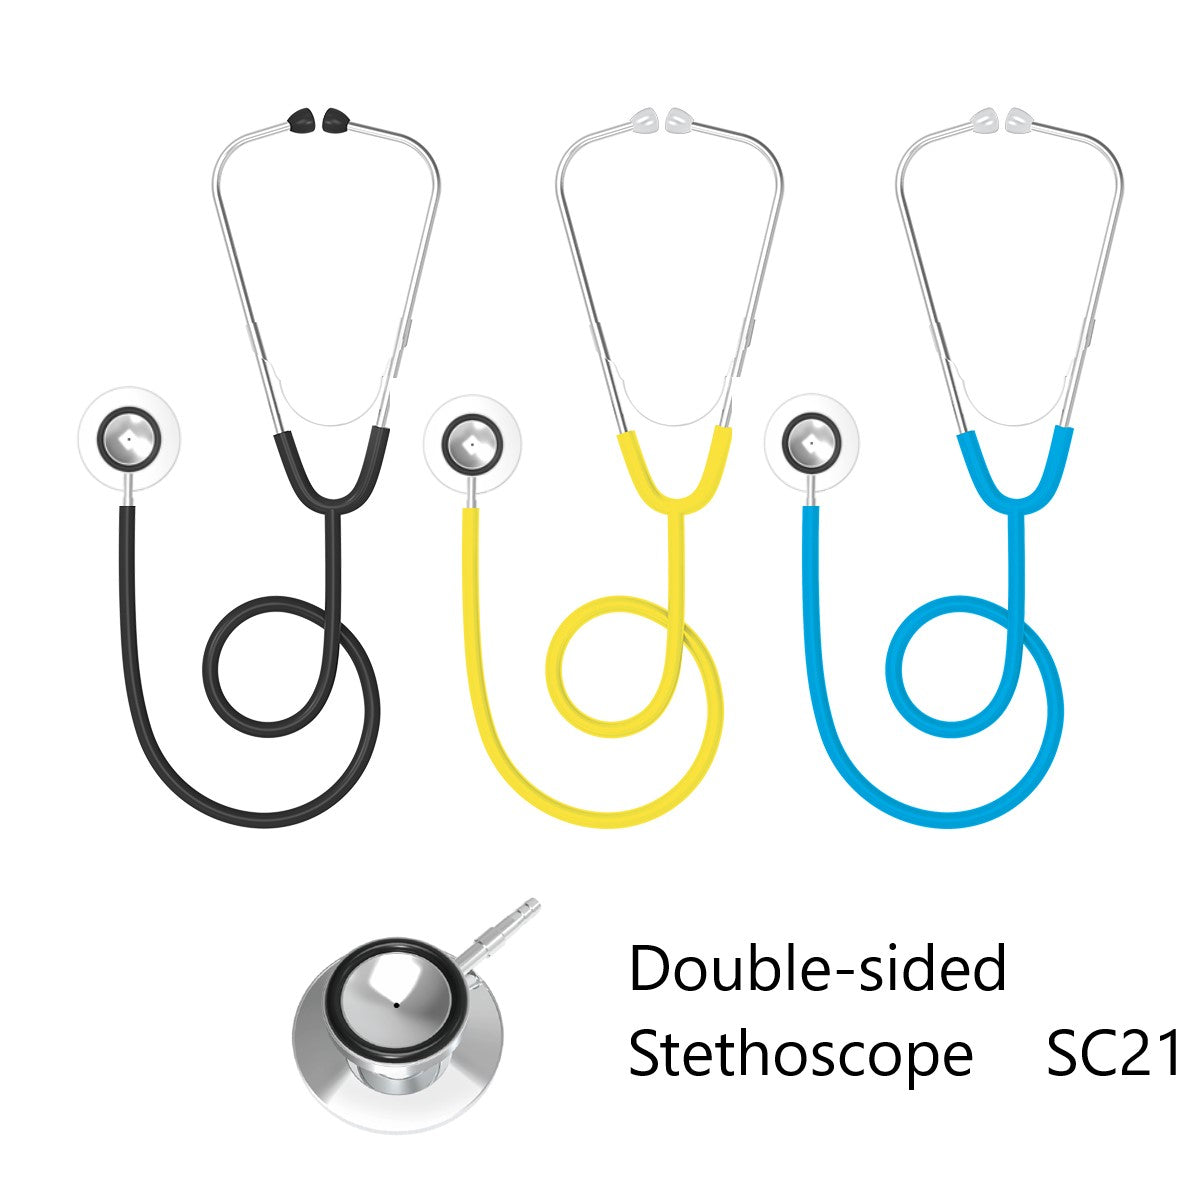 Portable Stethoscope SC21 COTNEC Double-sided Professional